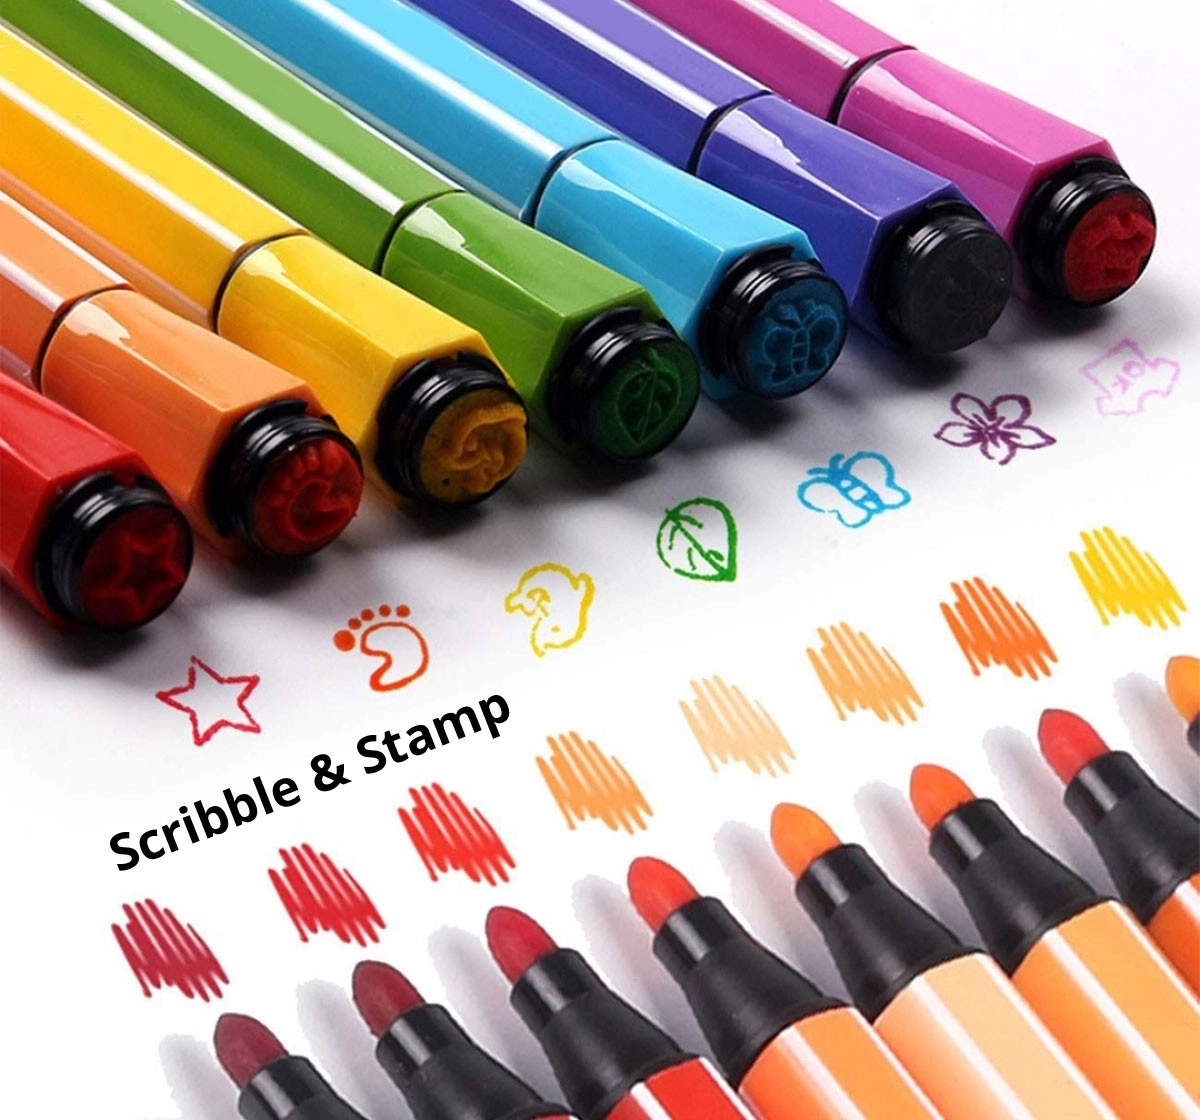 Scoobies Acrylic Markers Acrylic Waterproof Paint Art Marker Pen Set For  Rock Painting, Diy Craft Projects, Ceramic, Glass, Canvas, Mug, Metal,  Wood, Easter Egg Multicolour, 4 Cm, 3Y+